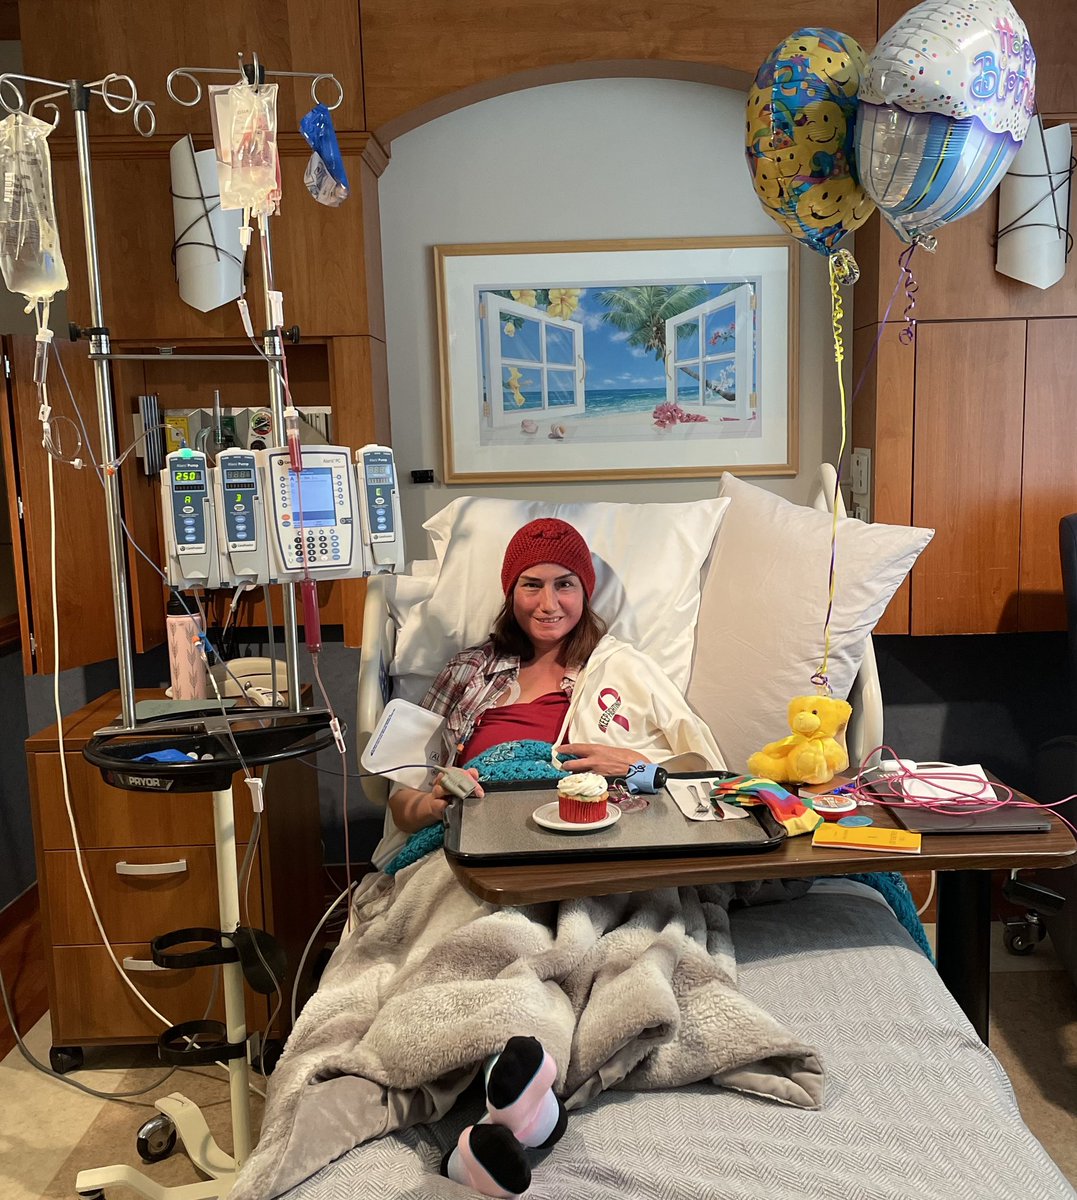 #Cancer sucks. This is my sister Teresa 15 days ago on her 2nd birthday, the day she got a stem cell transplant after chemo. She’s a #cancerfighter The cancer signs started last May with bone pain in her ribs. Sharing to help others this multiple #myelomaawarenessmonth